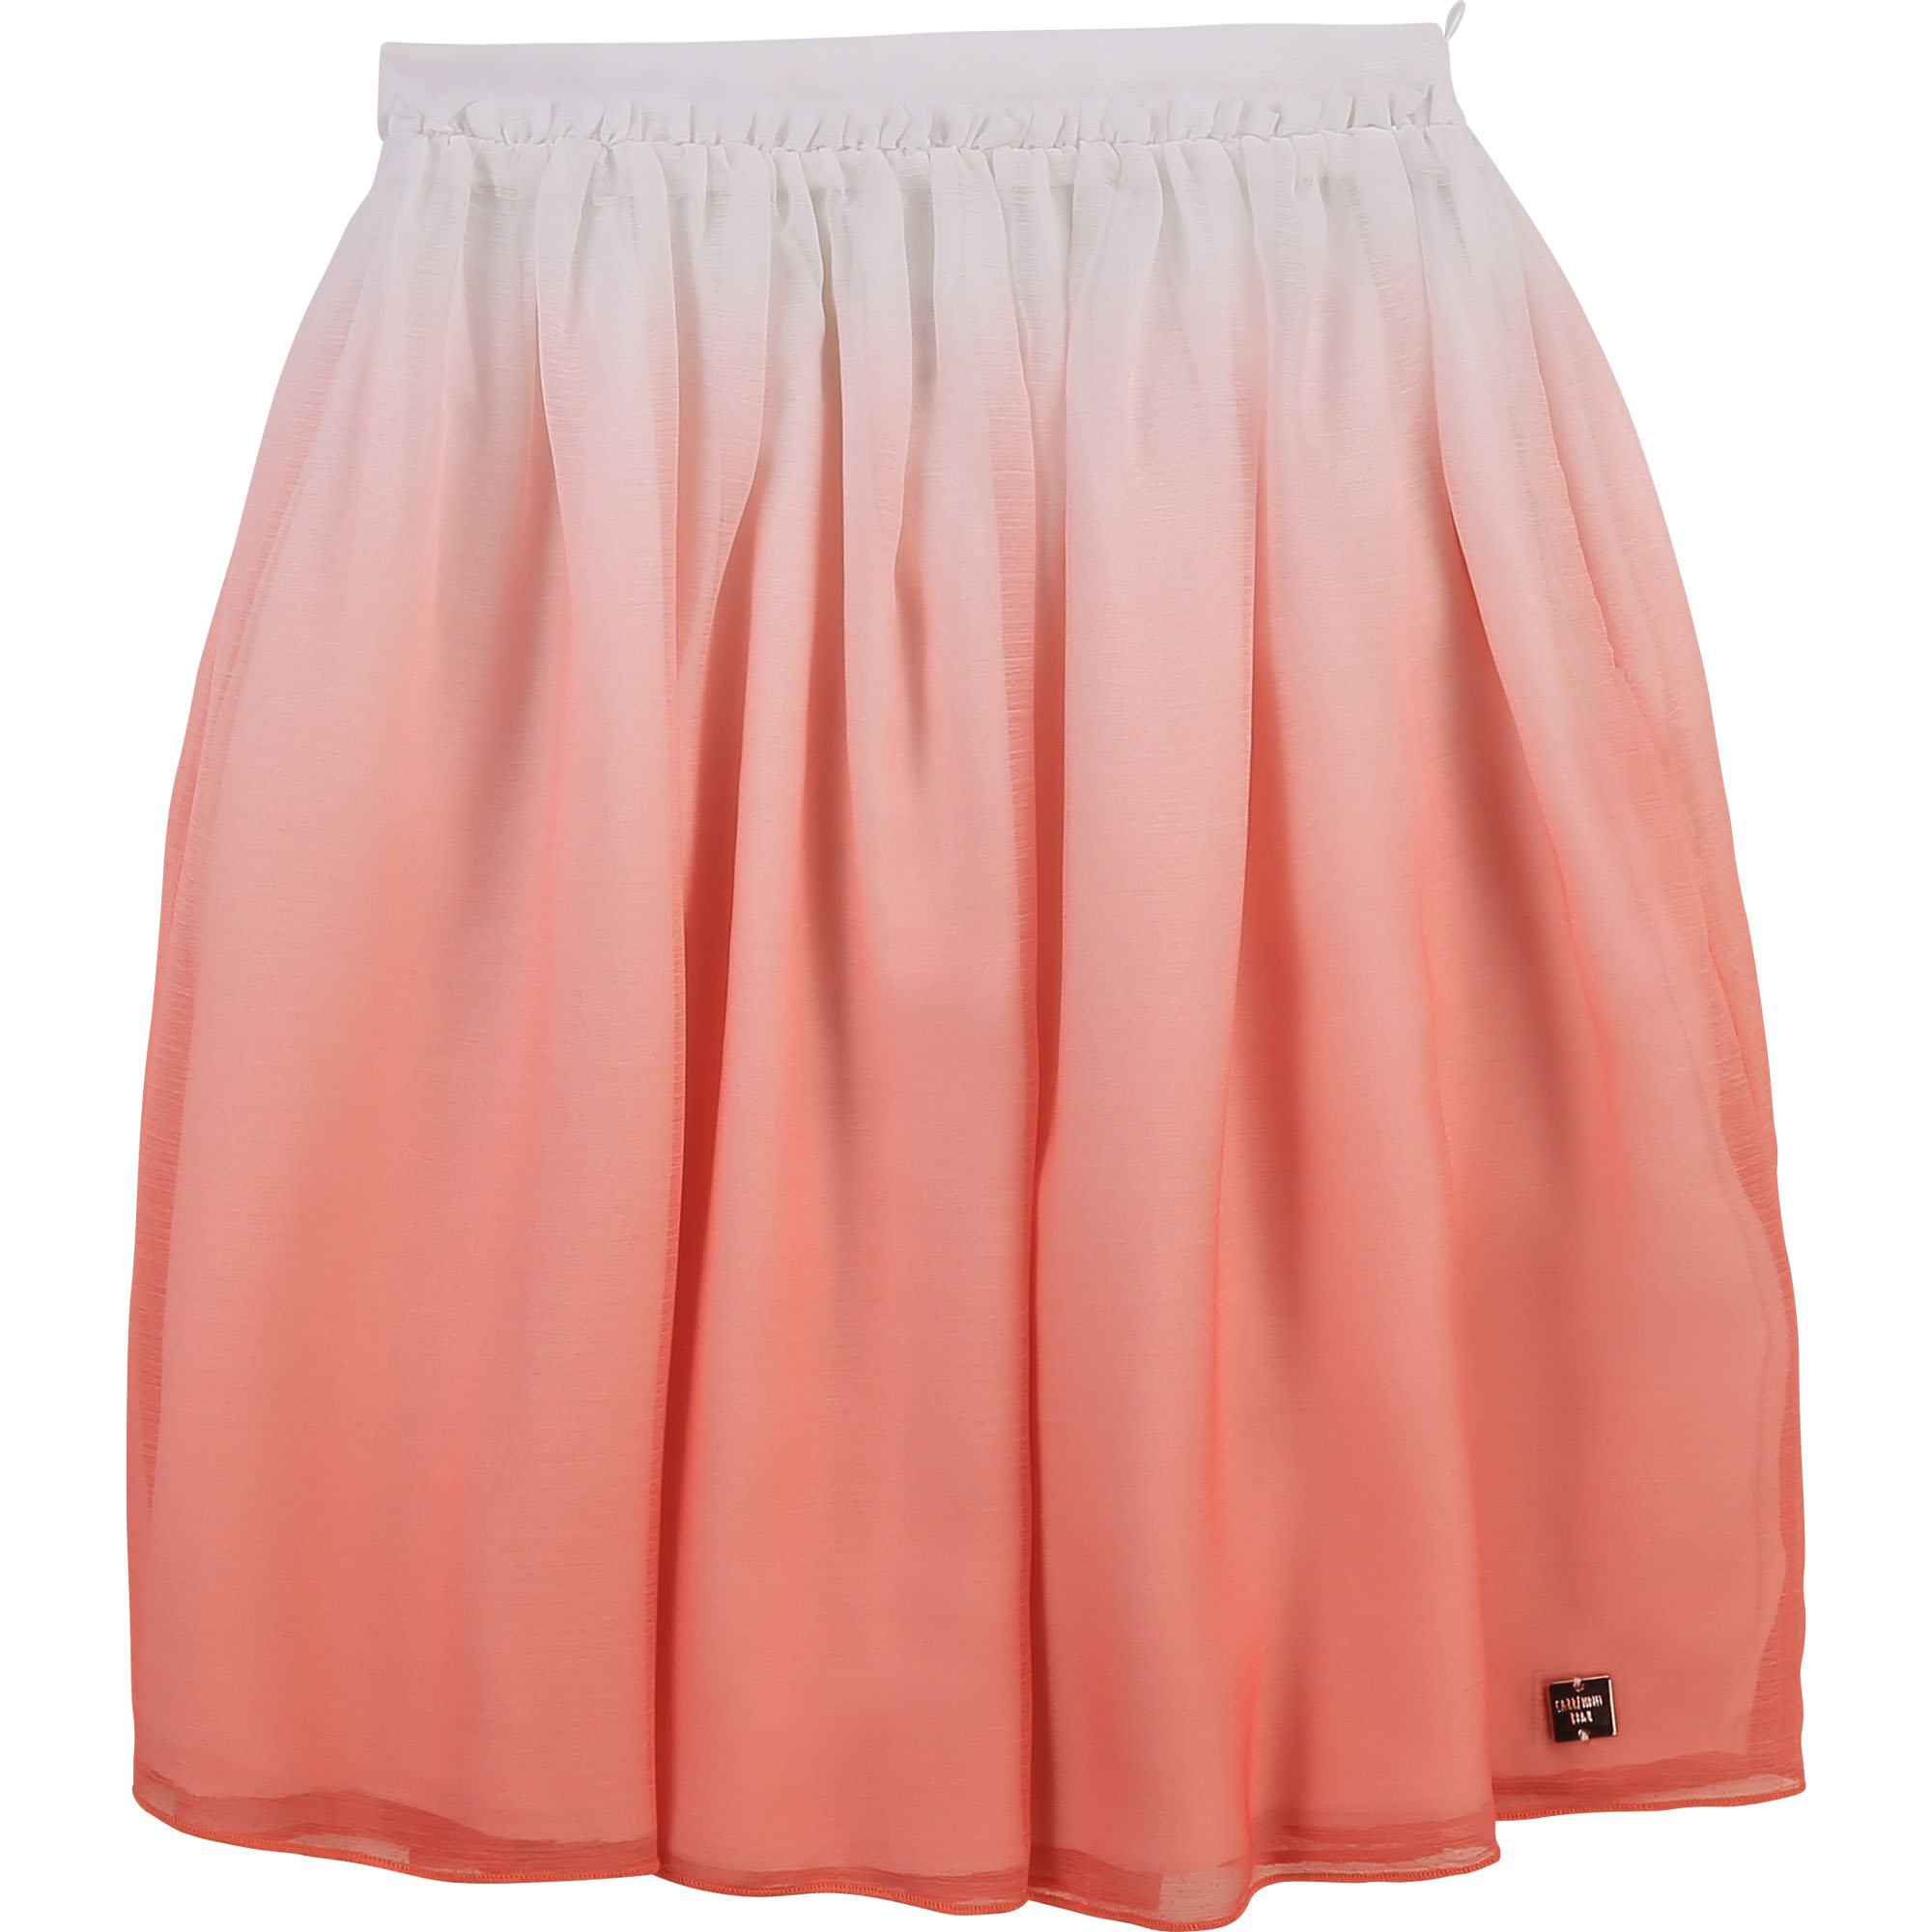 Dip-dyed voile skirt CARREMENT BEAU for GIRL